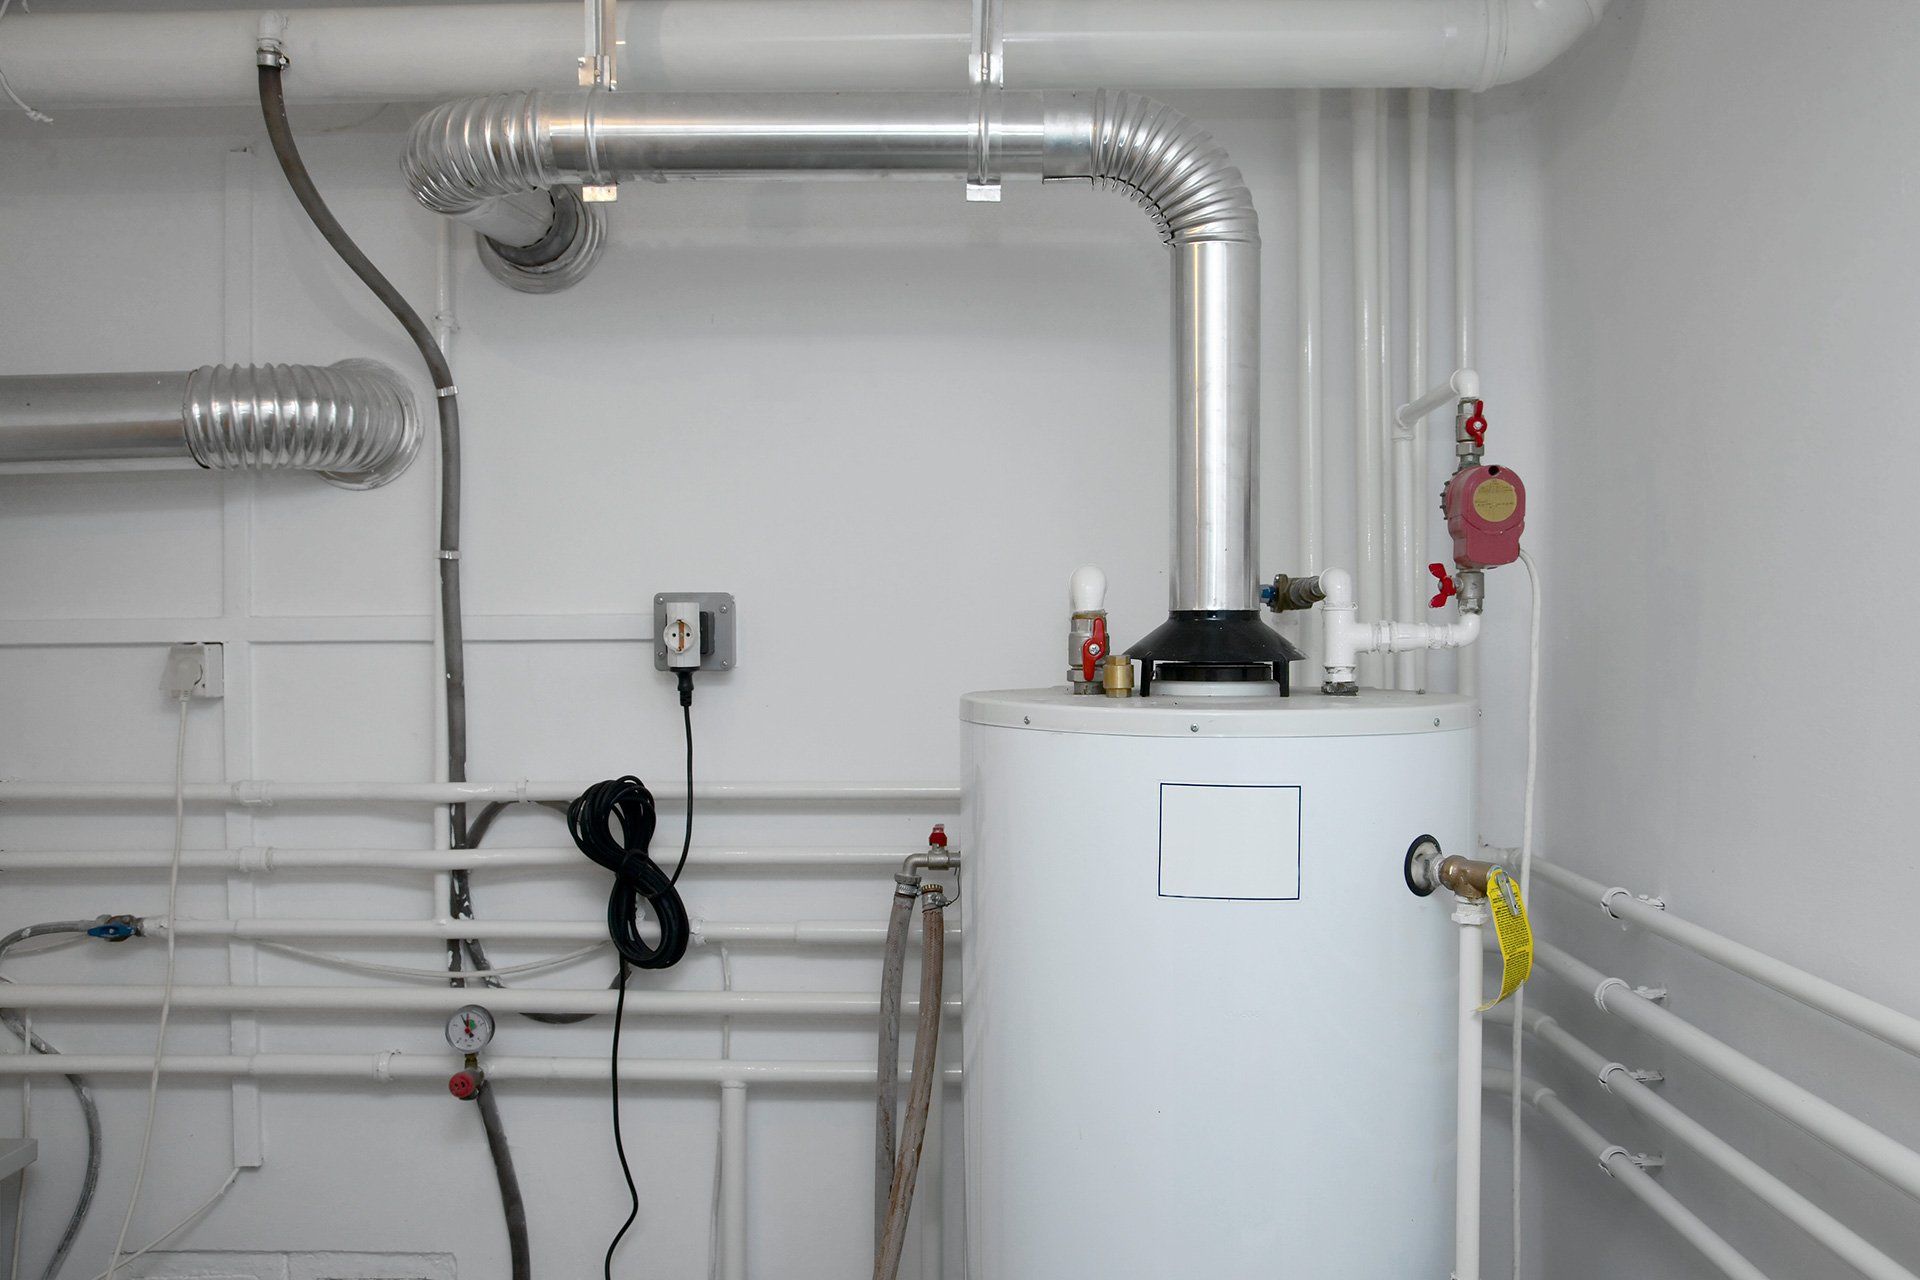 hot water tank and pipes